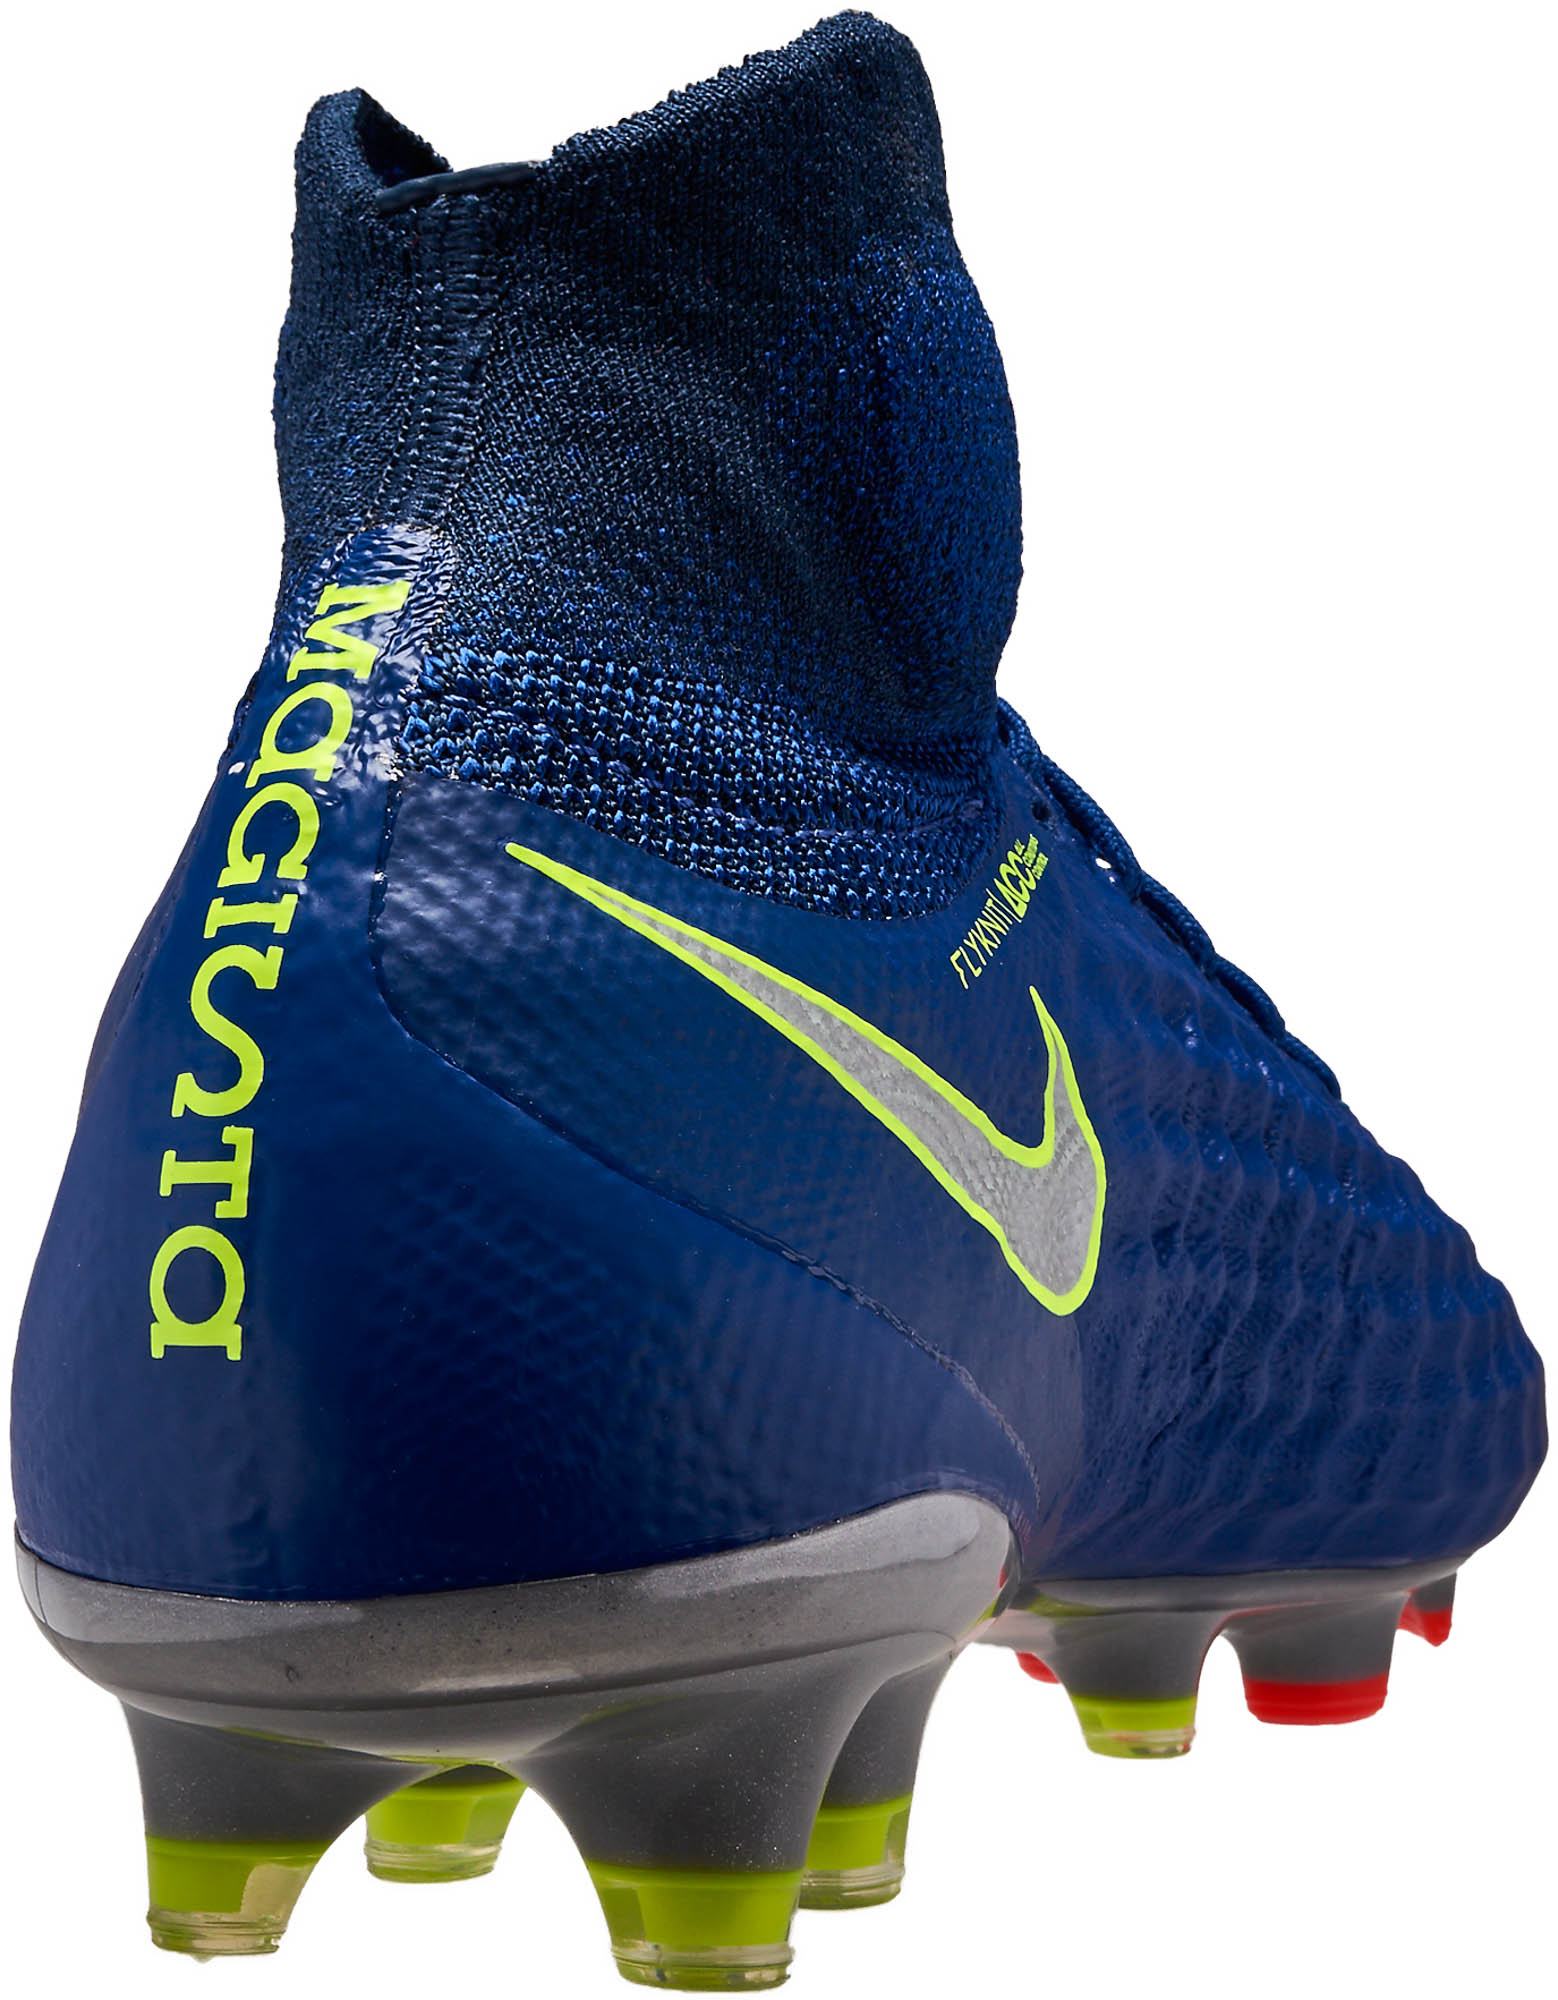 Nike MAGISTAX Proximo LL IC Indoor Soccer Shoes Volt